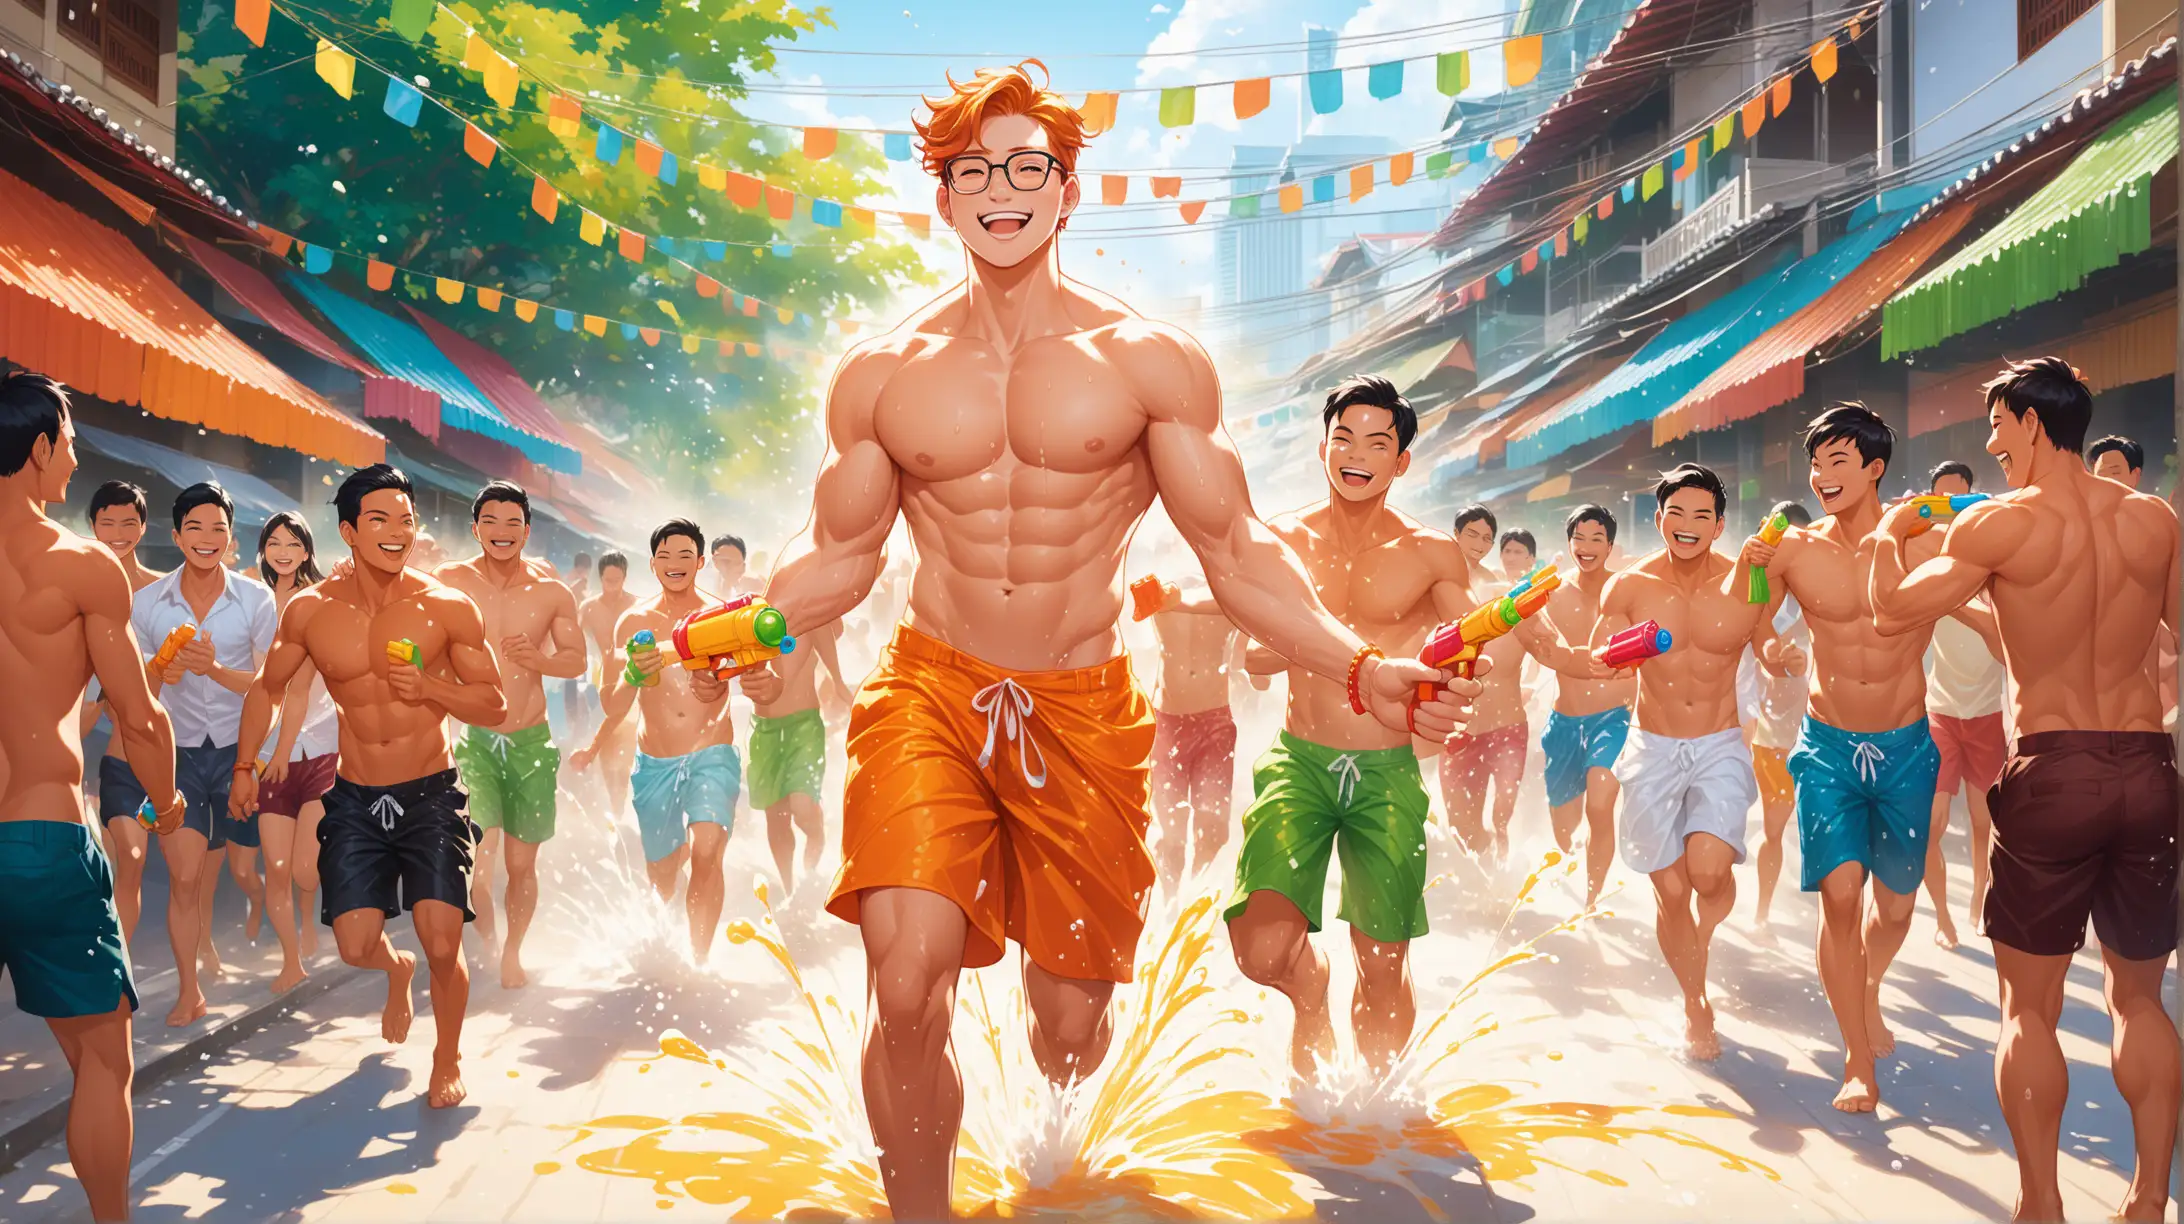 AI Drawing Prompt:
"Amidst the vibrant festivities of the Songkran festival in Bangkok, Laurence, a charismatic tanned ginger shirtless hunk sporting glasses, finds himself immersed in the spirited water fights that characterize the celebration. With a water pistol firmly gripped in his hands, he exudes an aura of playful confidence as he navigates through the bustling streets.

Laurence's short, dampened hair adds to his carefree appearance, while his shirtless, chiseled physique glistens under the warm sunlight. His muscular frame is on full display, drawing admiring glances from the hot gay men around him who are also engaged in the lively water fights.

As streams of water crisscross through the air, laughter fills the streets, creating an atmosphere of joy and camaraderie. Laurence's infectious smile reflects the sheer delight of the moment as he joins in the spirited exchanges, dodging and weaving amidst the playful chaos.

In the background, the vibrant colors and bustling energy of Bangkok's streets provide a dynamic backdrop to the scene, with traditional Thai architecture adding to the festive ambiance. Palm trees sway gently in the breeze, casting dappled shadows on the pavement as the festivities continue into the day.

Overall, the illustration captures the exuberance and sense of community that defines the Songkran festival, with Laurence at the heart of the action, fully embracing the joyous spirit of the celebration alongside his fellow hot gay men."